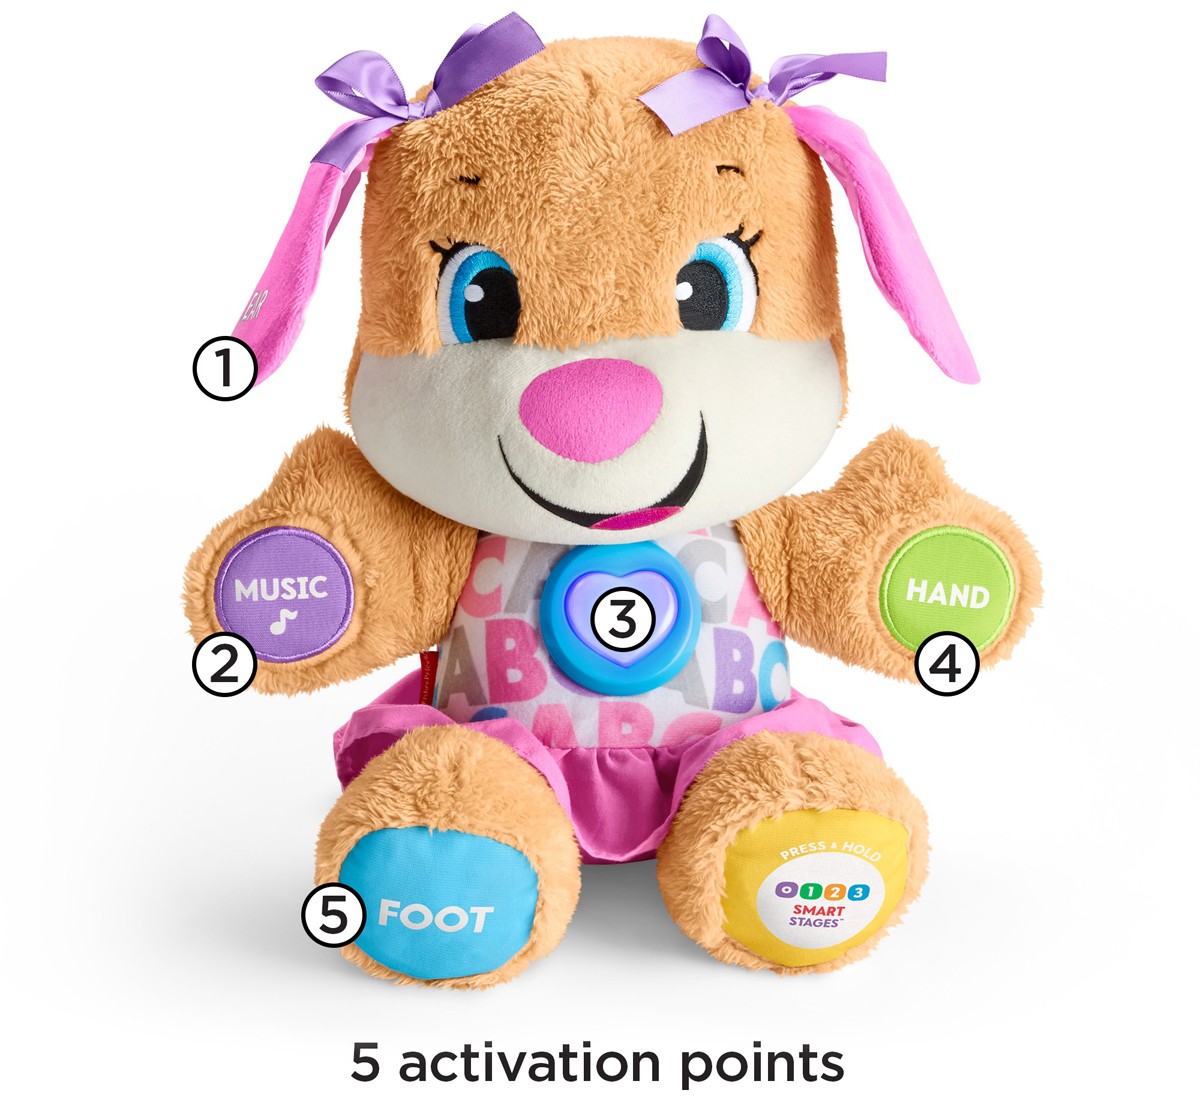 Fisher-Price Plush Dog Baby Toy With Lights Music And Smart Stages Learning Content, 0Y+, Multicolour